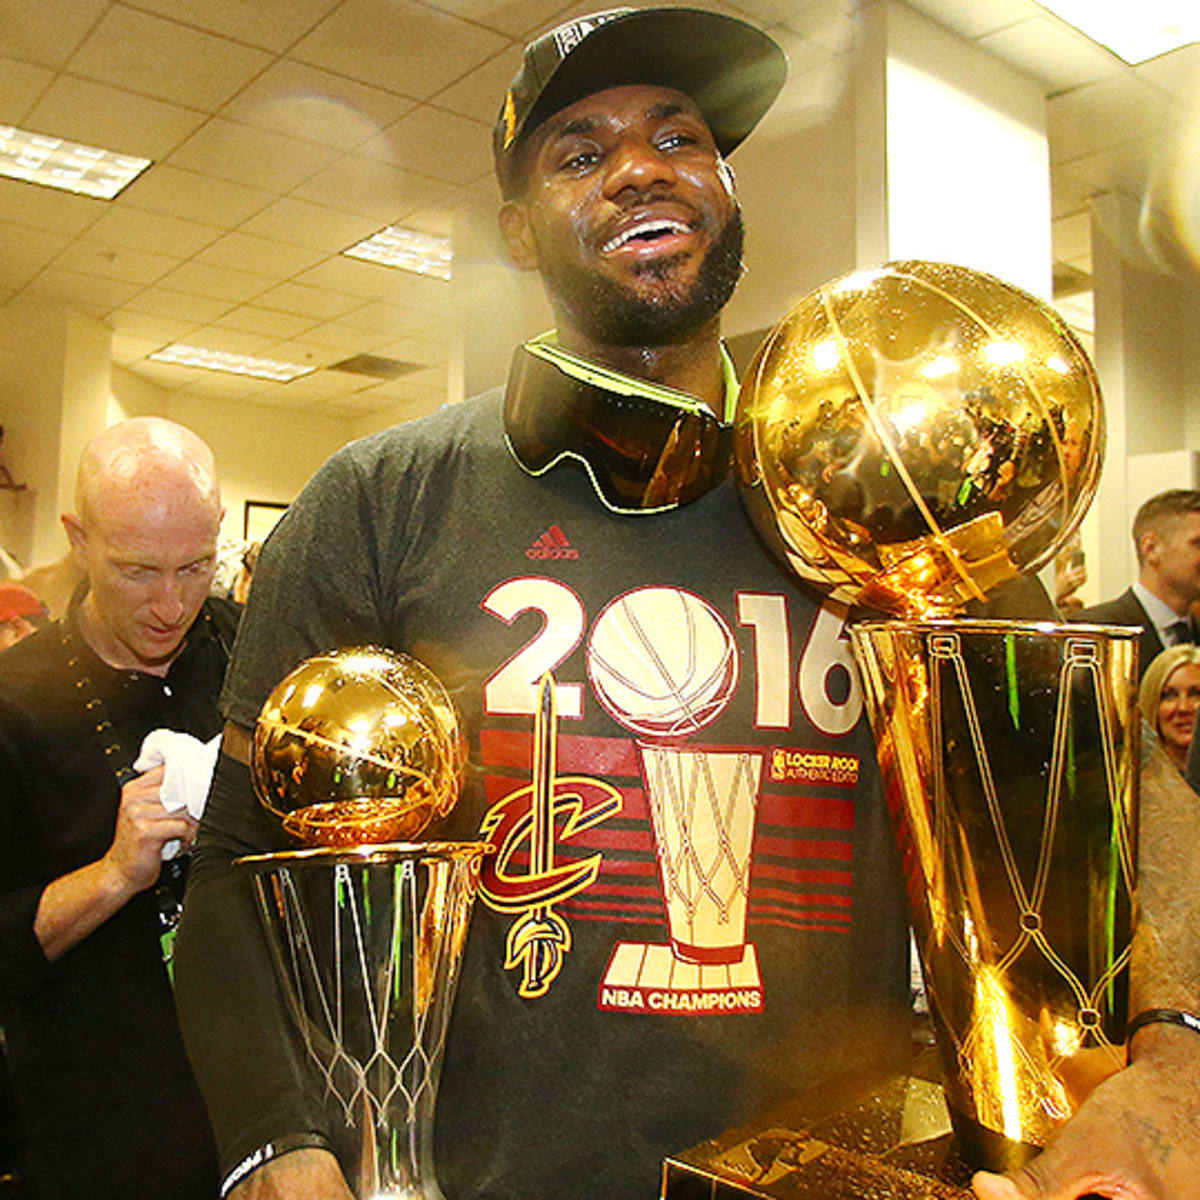 LeBron James of Cleveland Cavaliers named unanimous NBA Finals MVP - ESPN